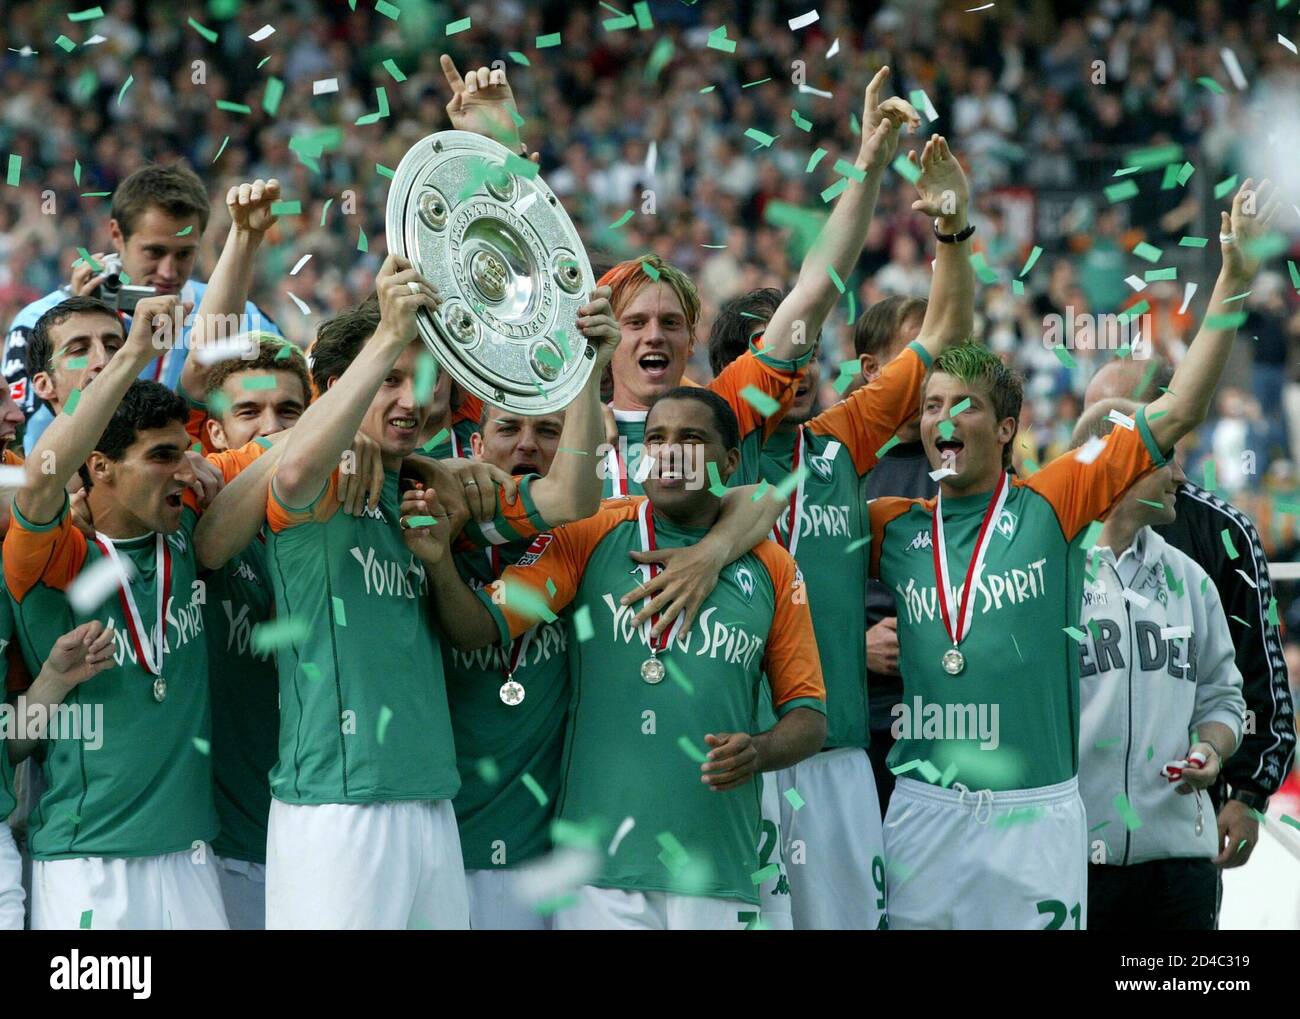 Werder Bremen's players celebrate with the German Bundesliga trophy in  Bremen after their match [against Bayer Leverkusen which they lost 2-6],  May 15, 2004. [Werder Bremen sealed their fourth Bundesliga title with